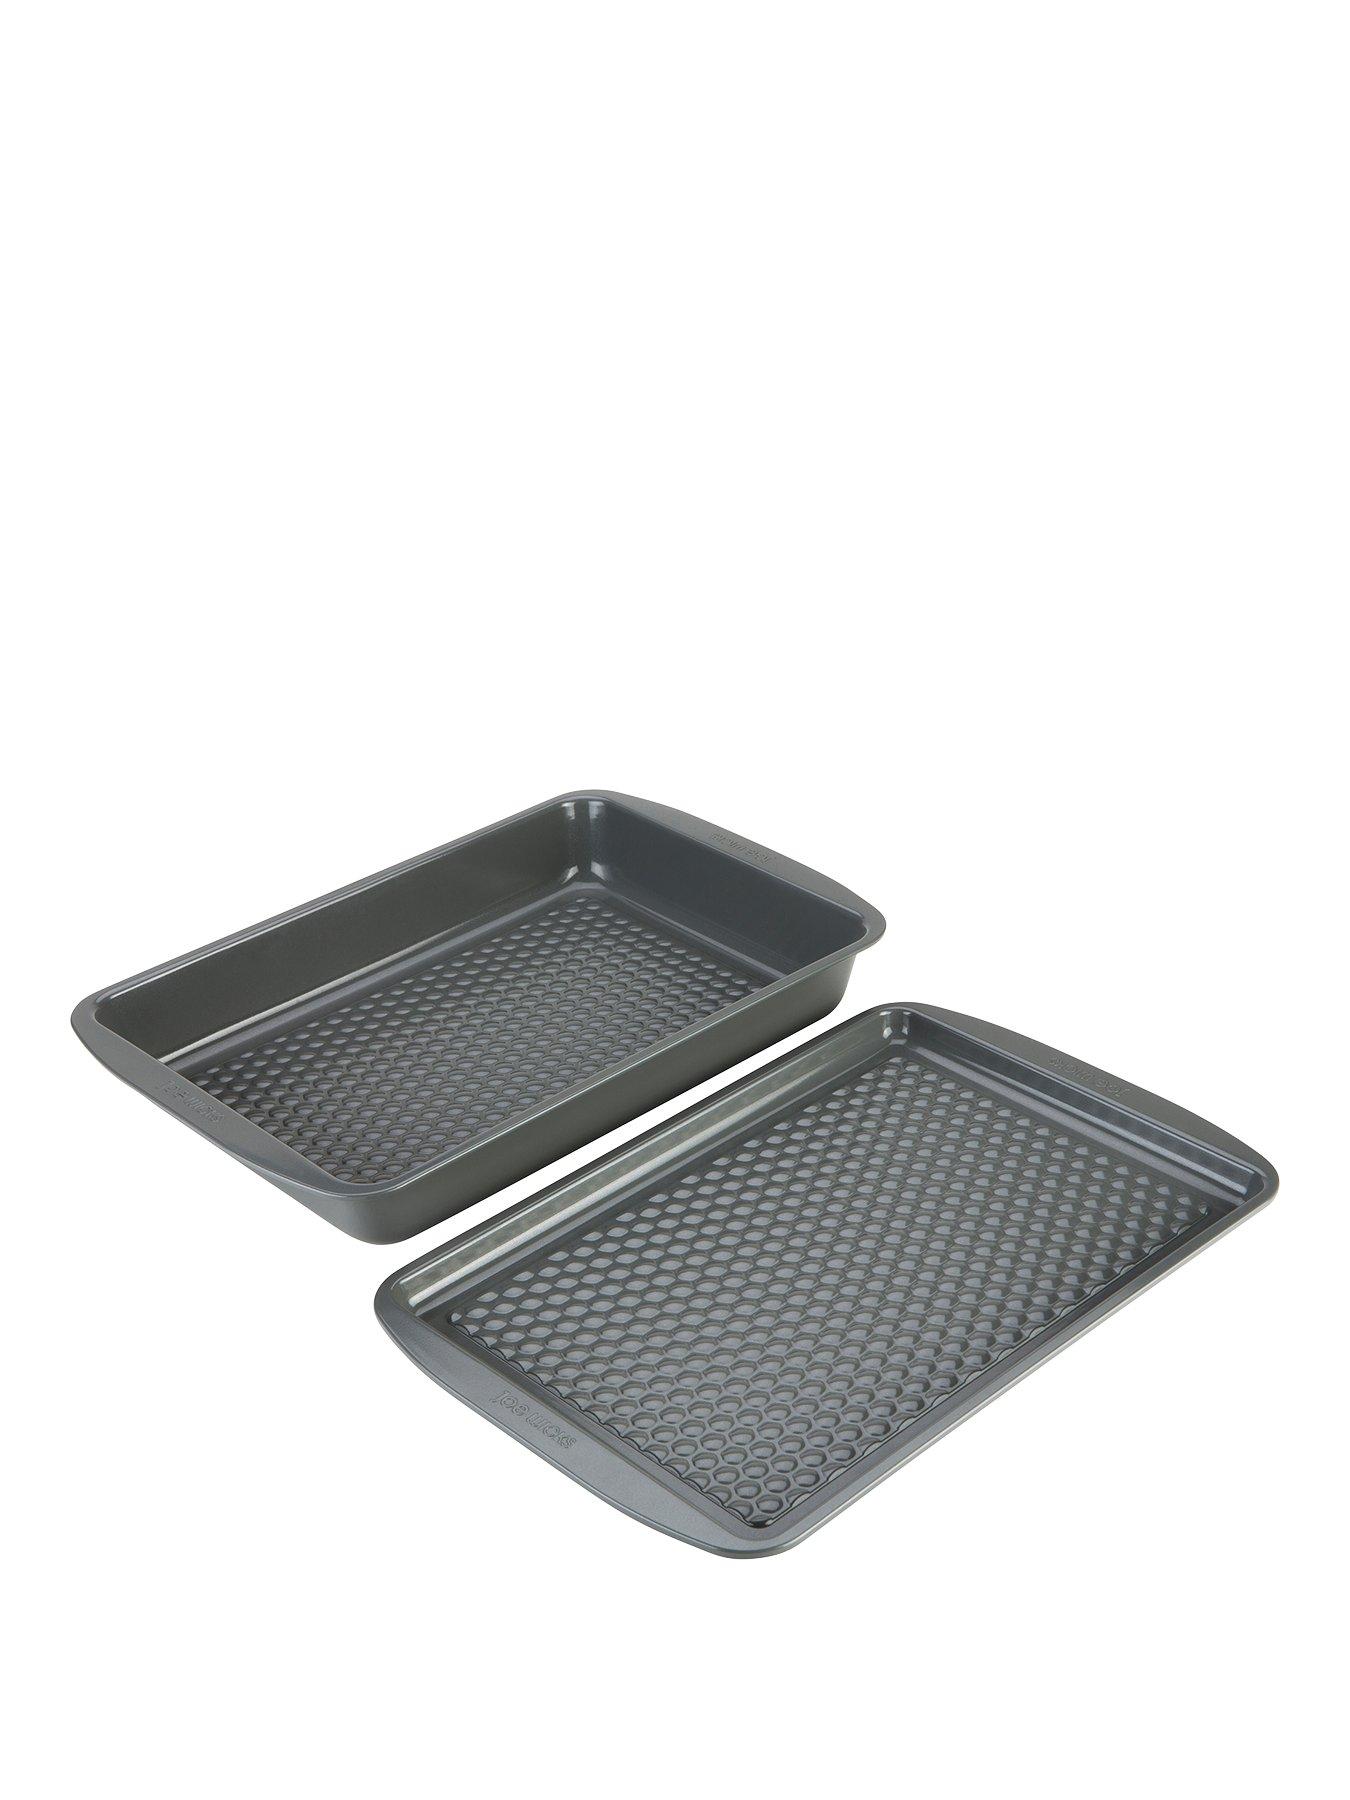 2 Piece Steel Silver Fearne by Swan Loaf Tin Set with Non-Stick Coating